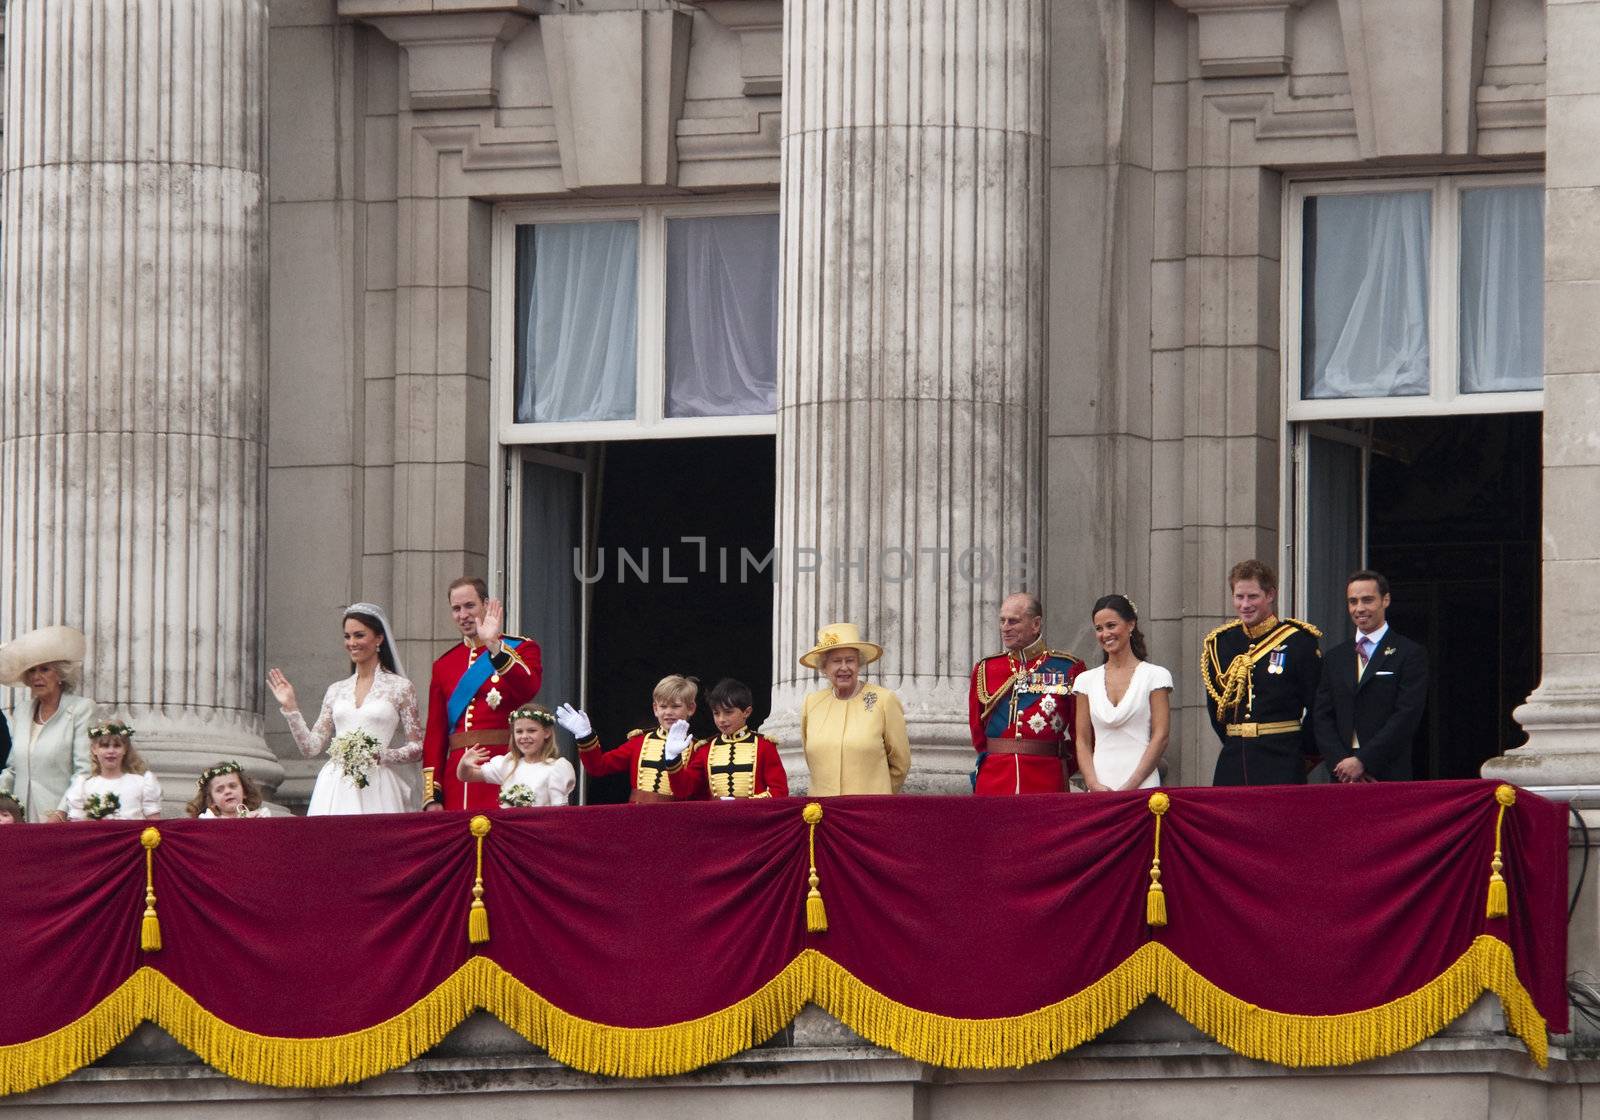 The royal wedding of Prince William and Kate Middleton, London, Friday April 29th, 2011